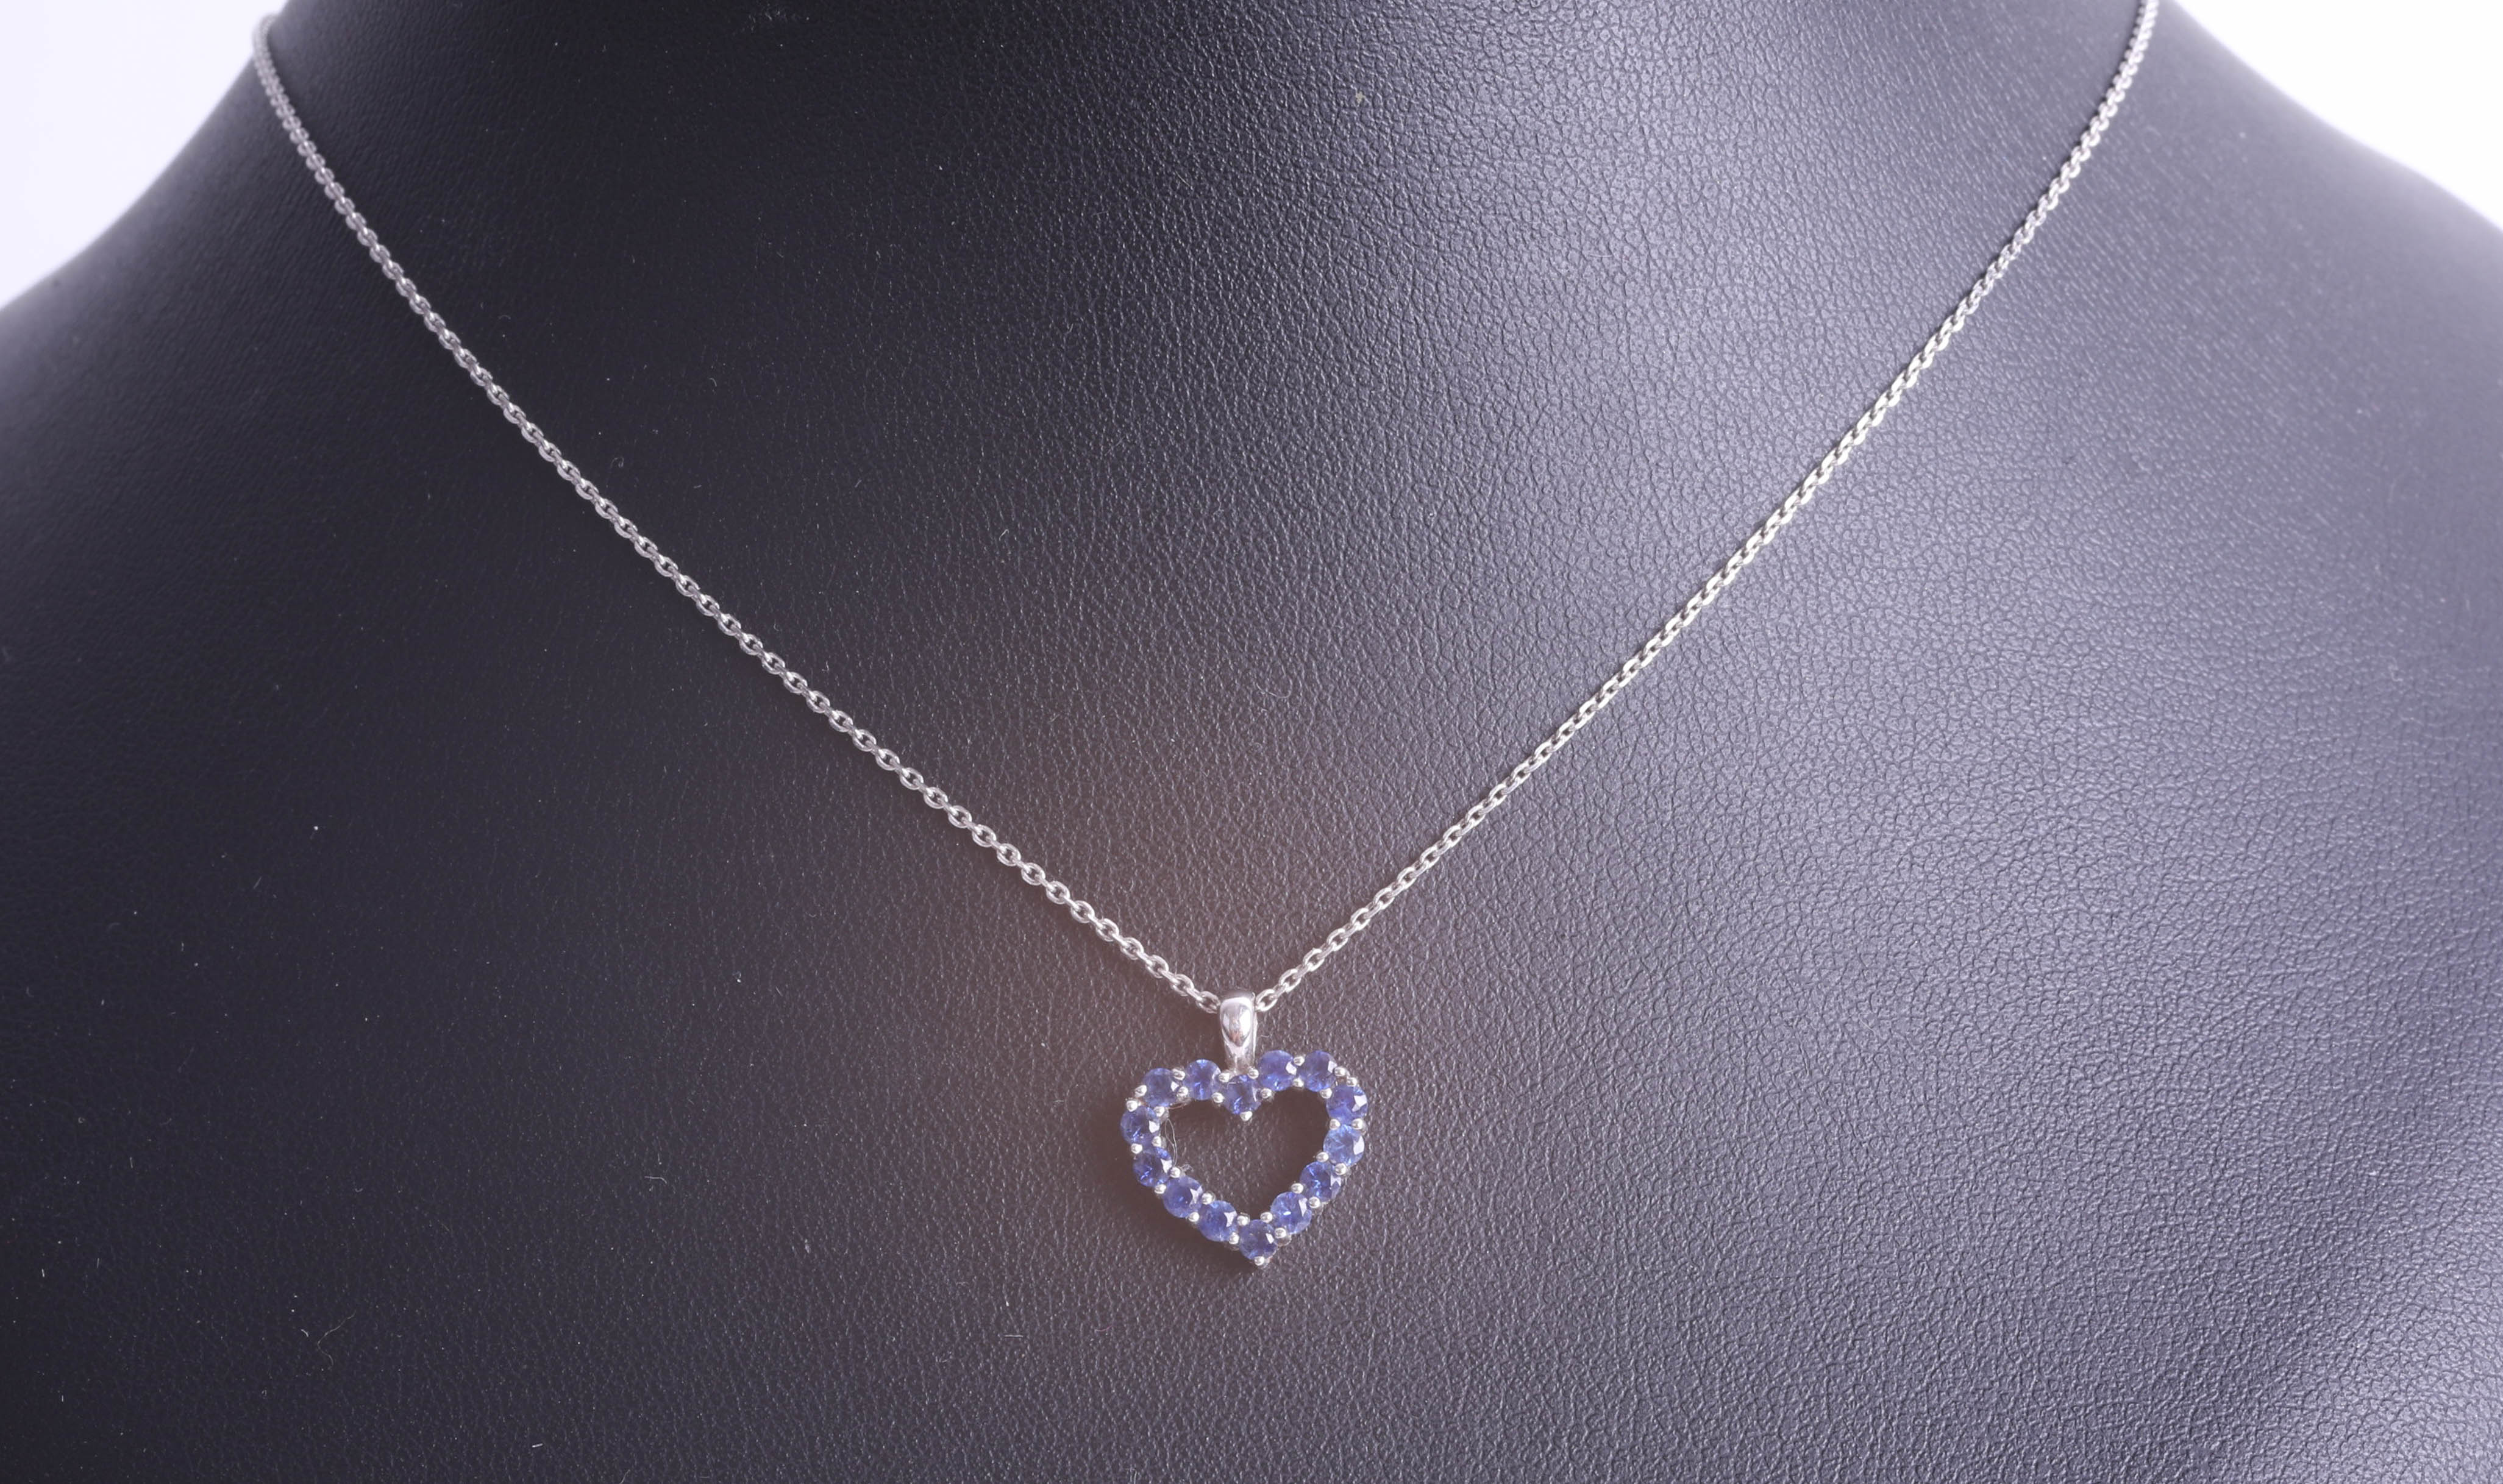 An 18ct white gold heart-shaped pendant, set with blue stone (sapphire?) on a fine chain. - Image 2 of 2